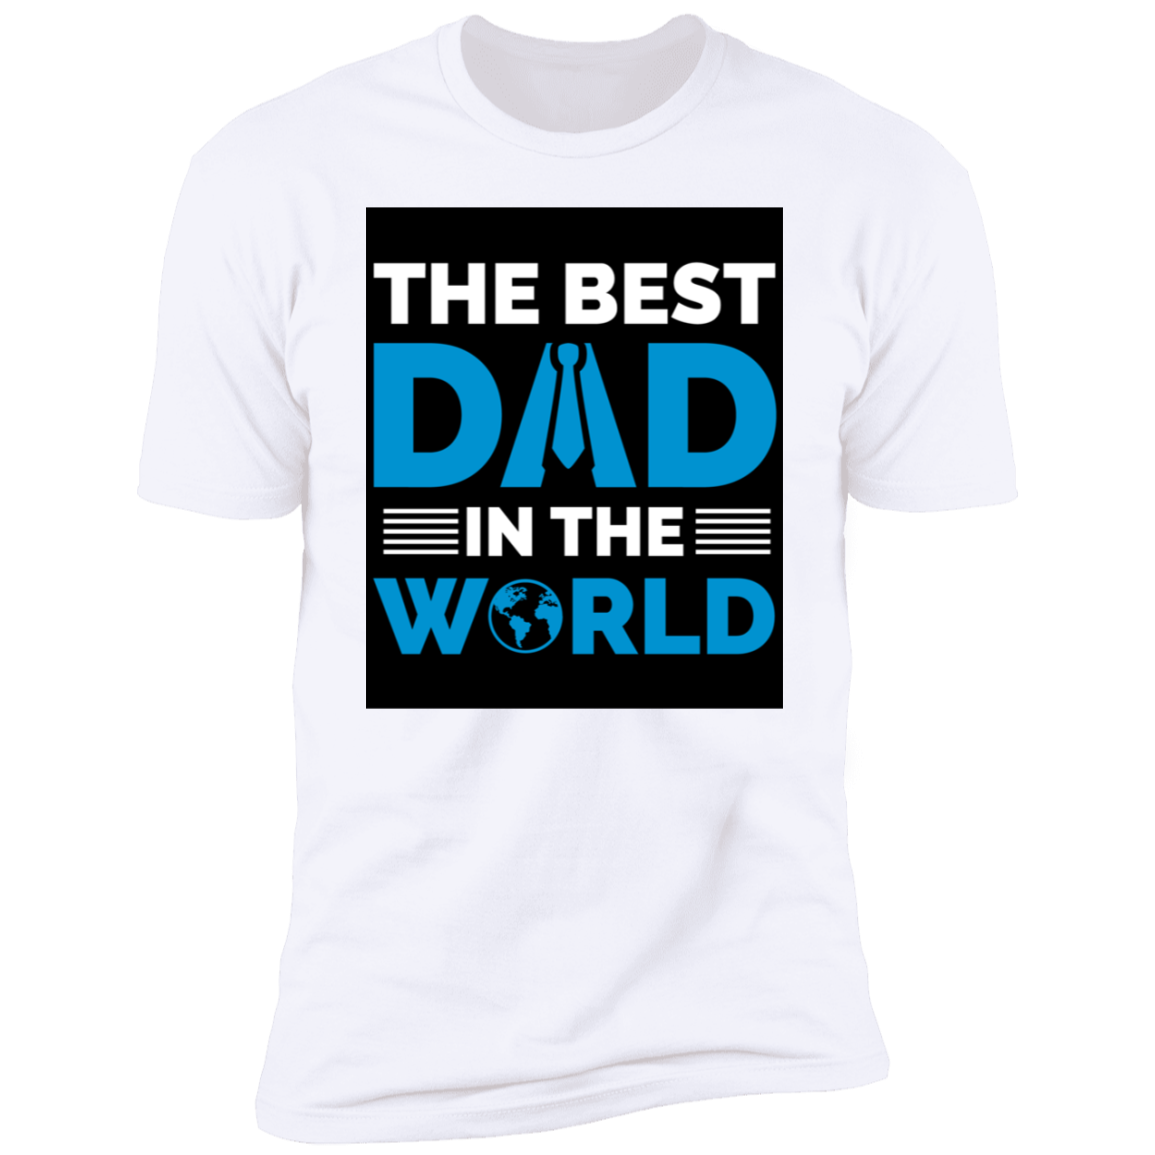 THE BEST DAD IN THE WORLD-Premium Short Sleeve T-Shirt